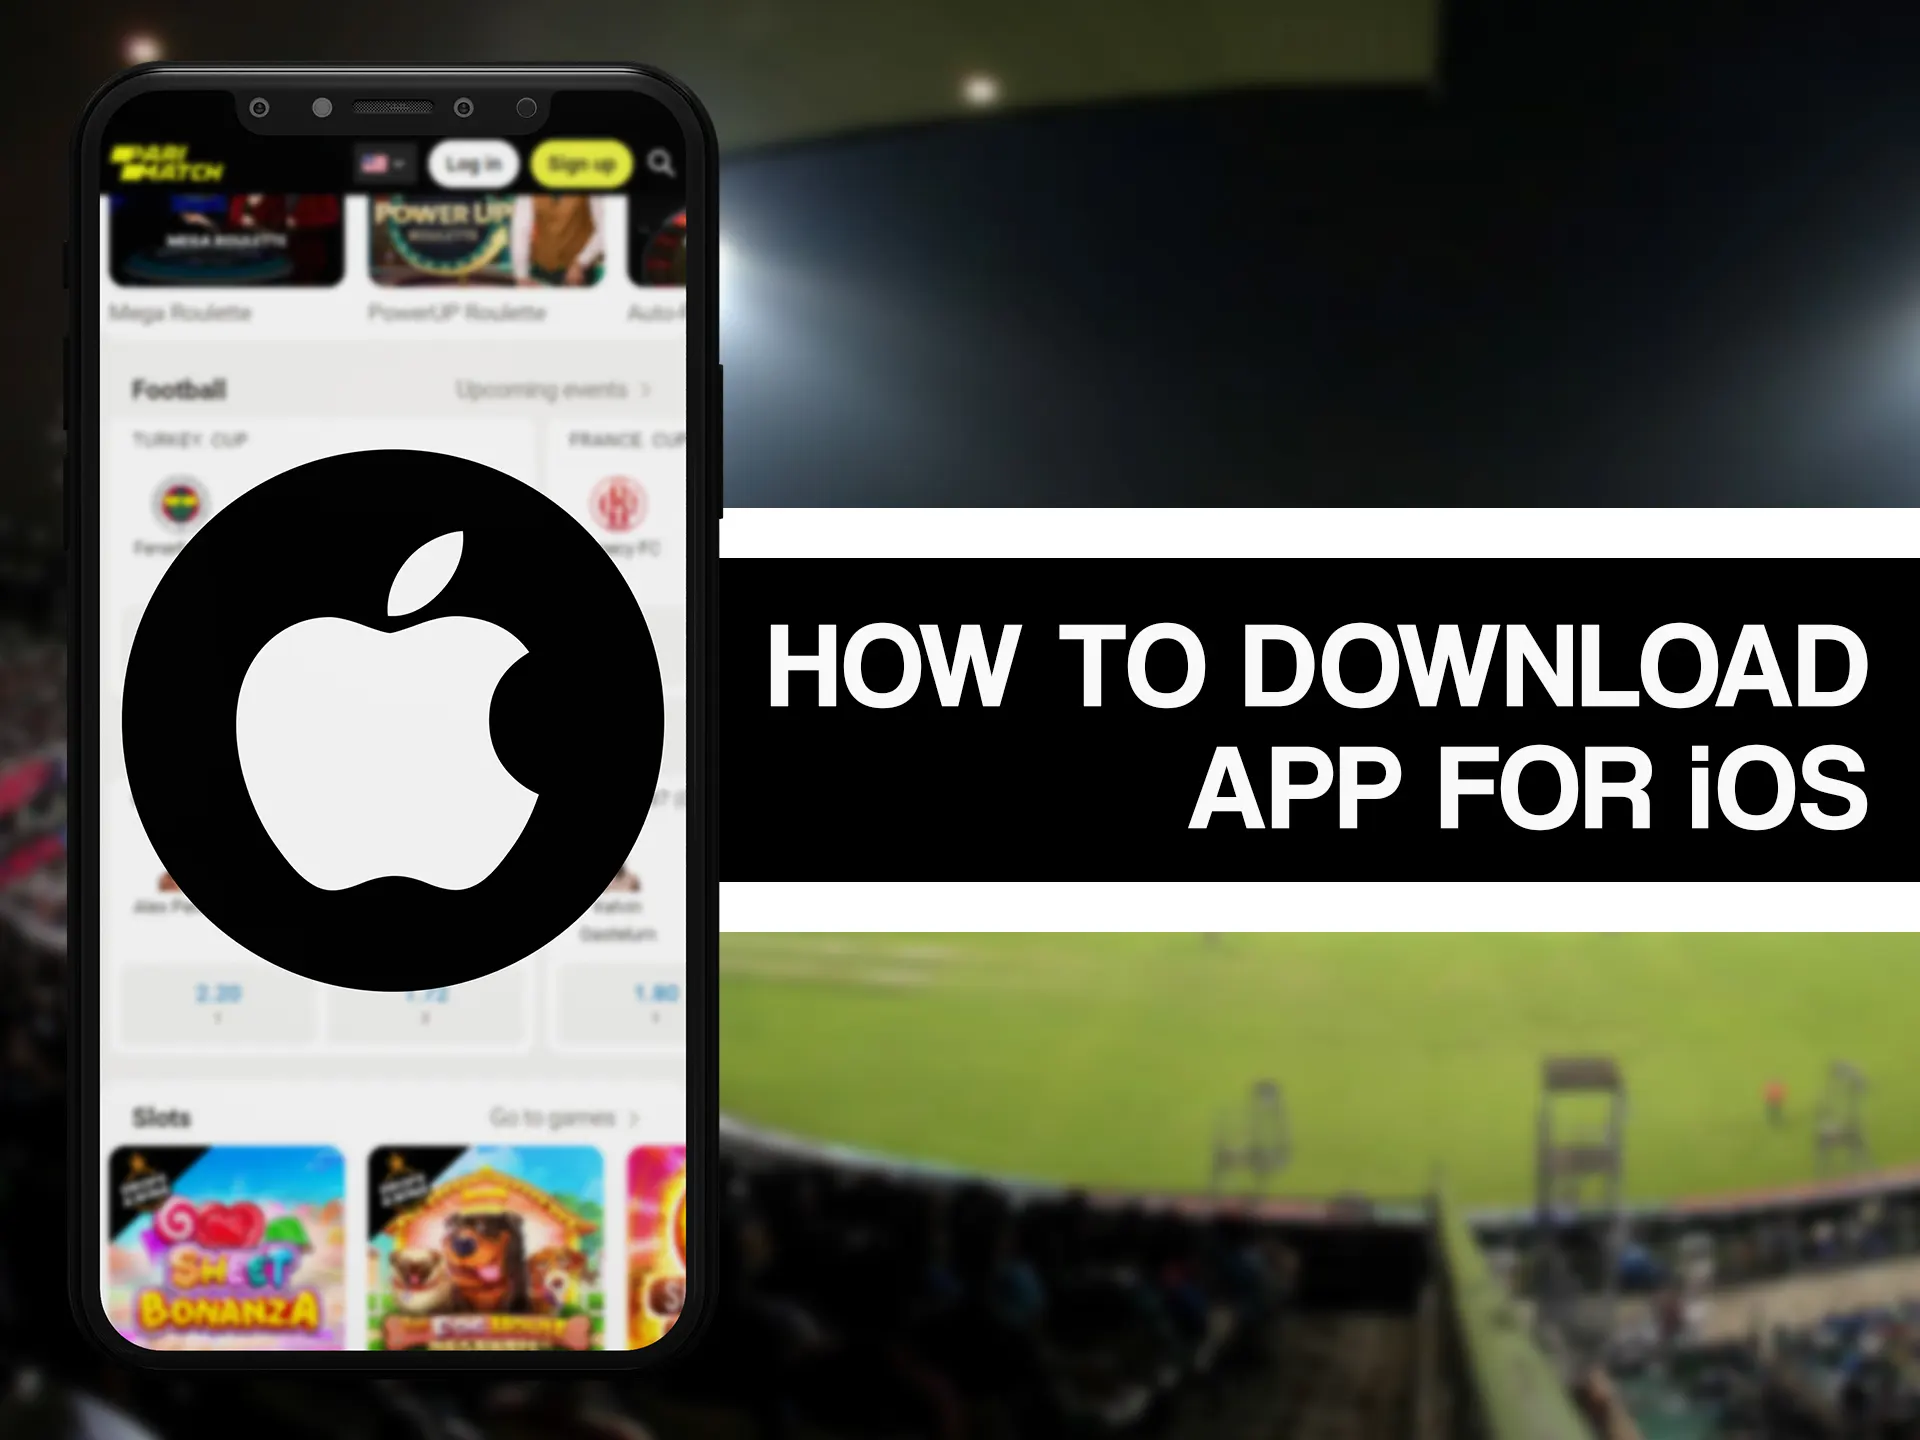 Visit betting company website and download iOS app from special page.